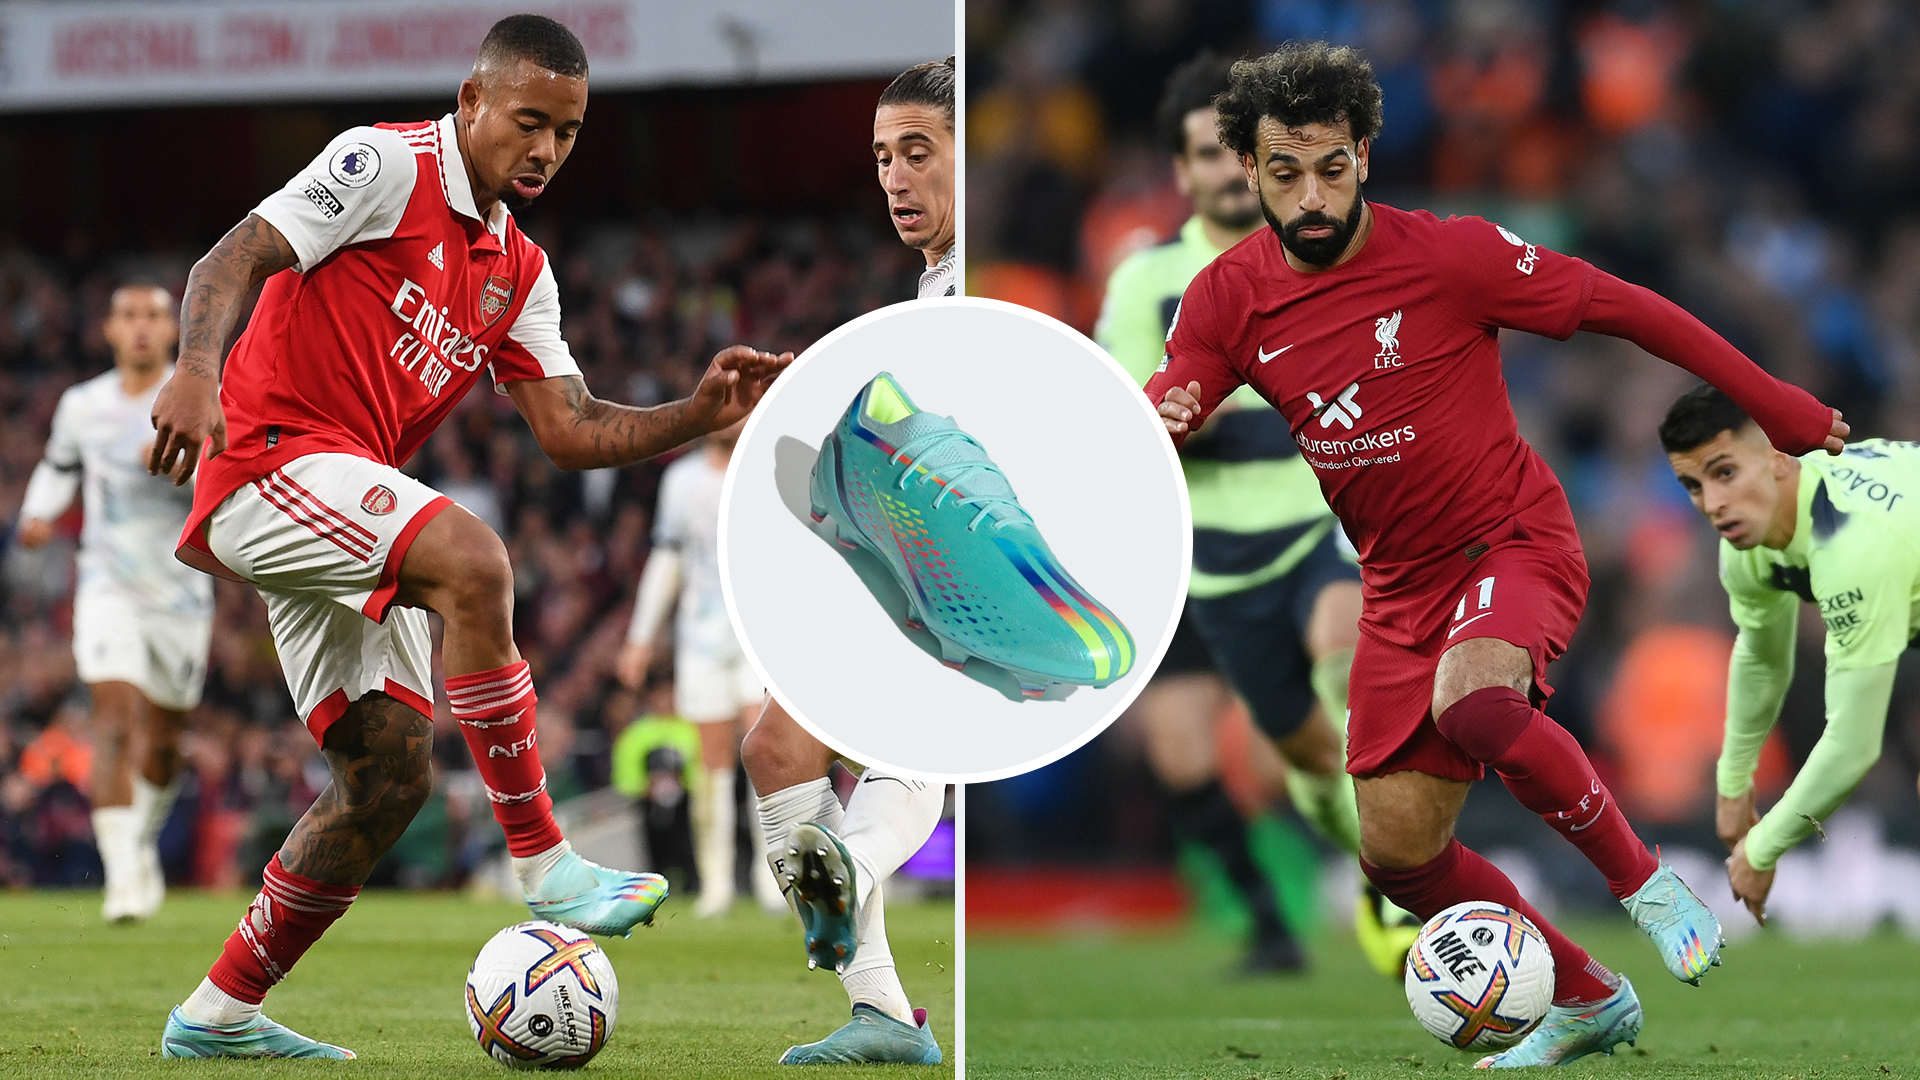 Preescolar Ánimo Año nuevo The most popular football boots worn by today's best players: What do  Messi, Ronaldo, Benzema, Haaland, Salah wear? | Goal.com